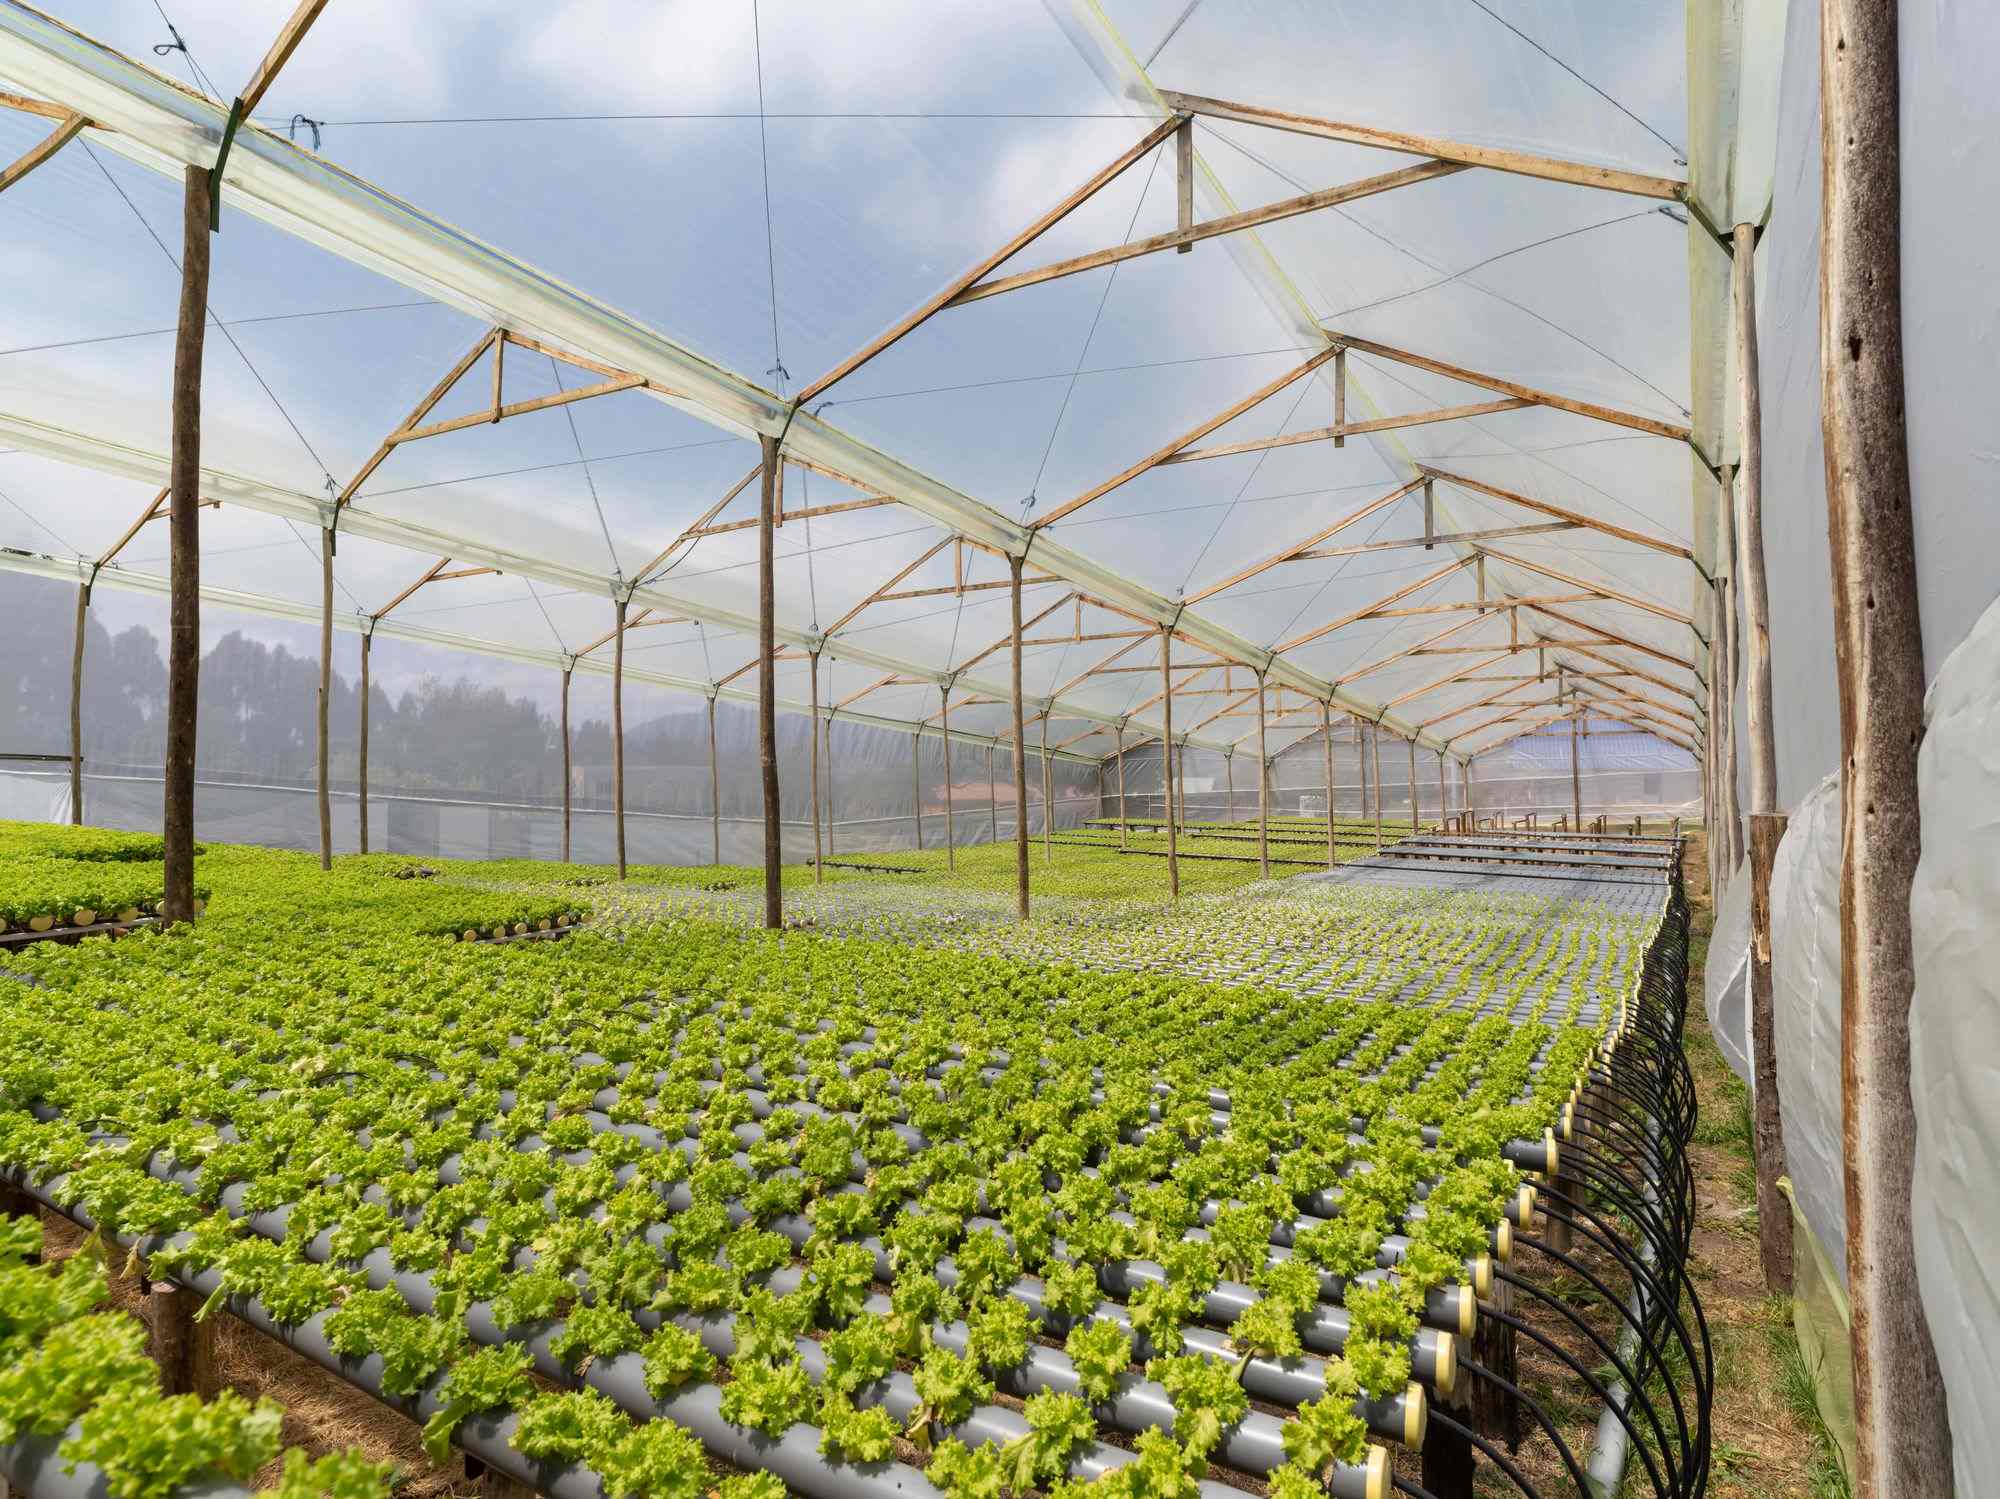 Why Is Hydroponics Sustainable